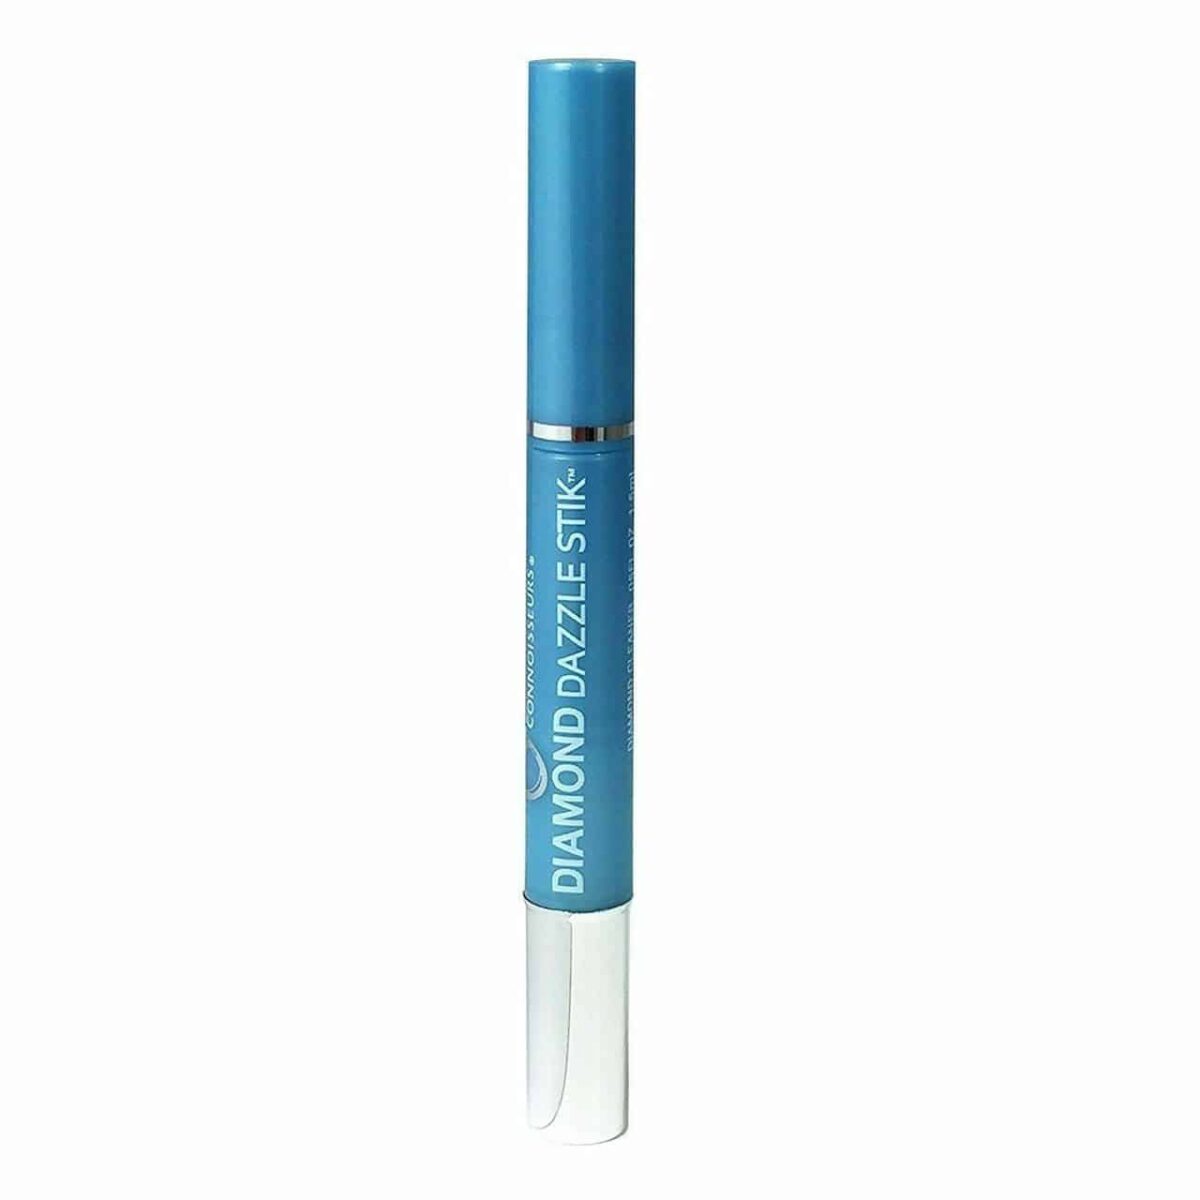 Connoisseurs Diamond Dazzle Stick for Diamond Stones Rings Intimate Cleaning 193877631328 3